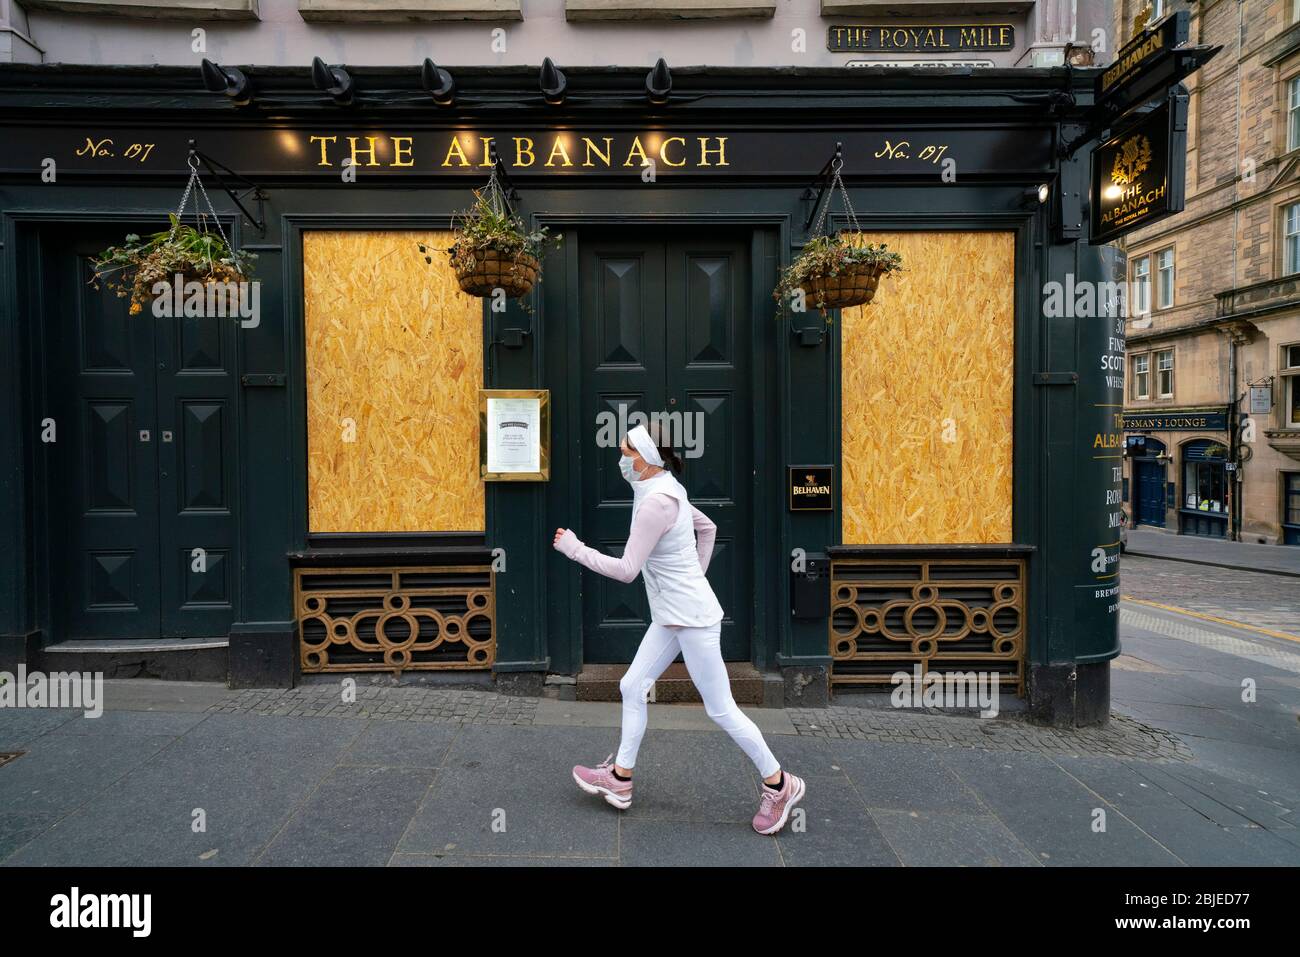 Edinburgh, Scotland, UK. 29 April 2020. Views of Edinburgh Old Town as coronavirus lockdown continues in Scotland. Streets remain deserted and shops and restaurants closed and many boarded up. Scottish Government now recommends public to wear face masks. Female jogger wearing face mask runs past a closed and boarded up Albanach pub on the Royal Mile. Iain Masterton/Alamy Live News Stock Photo